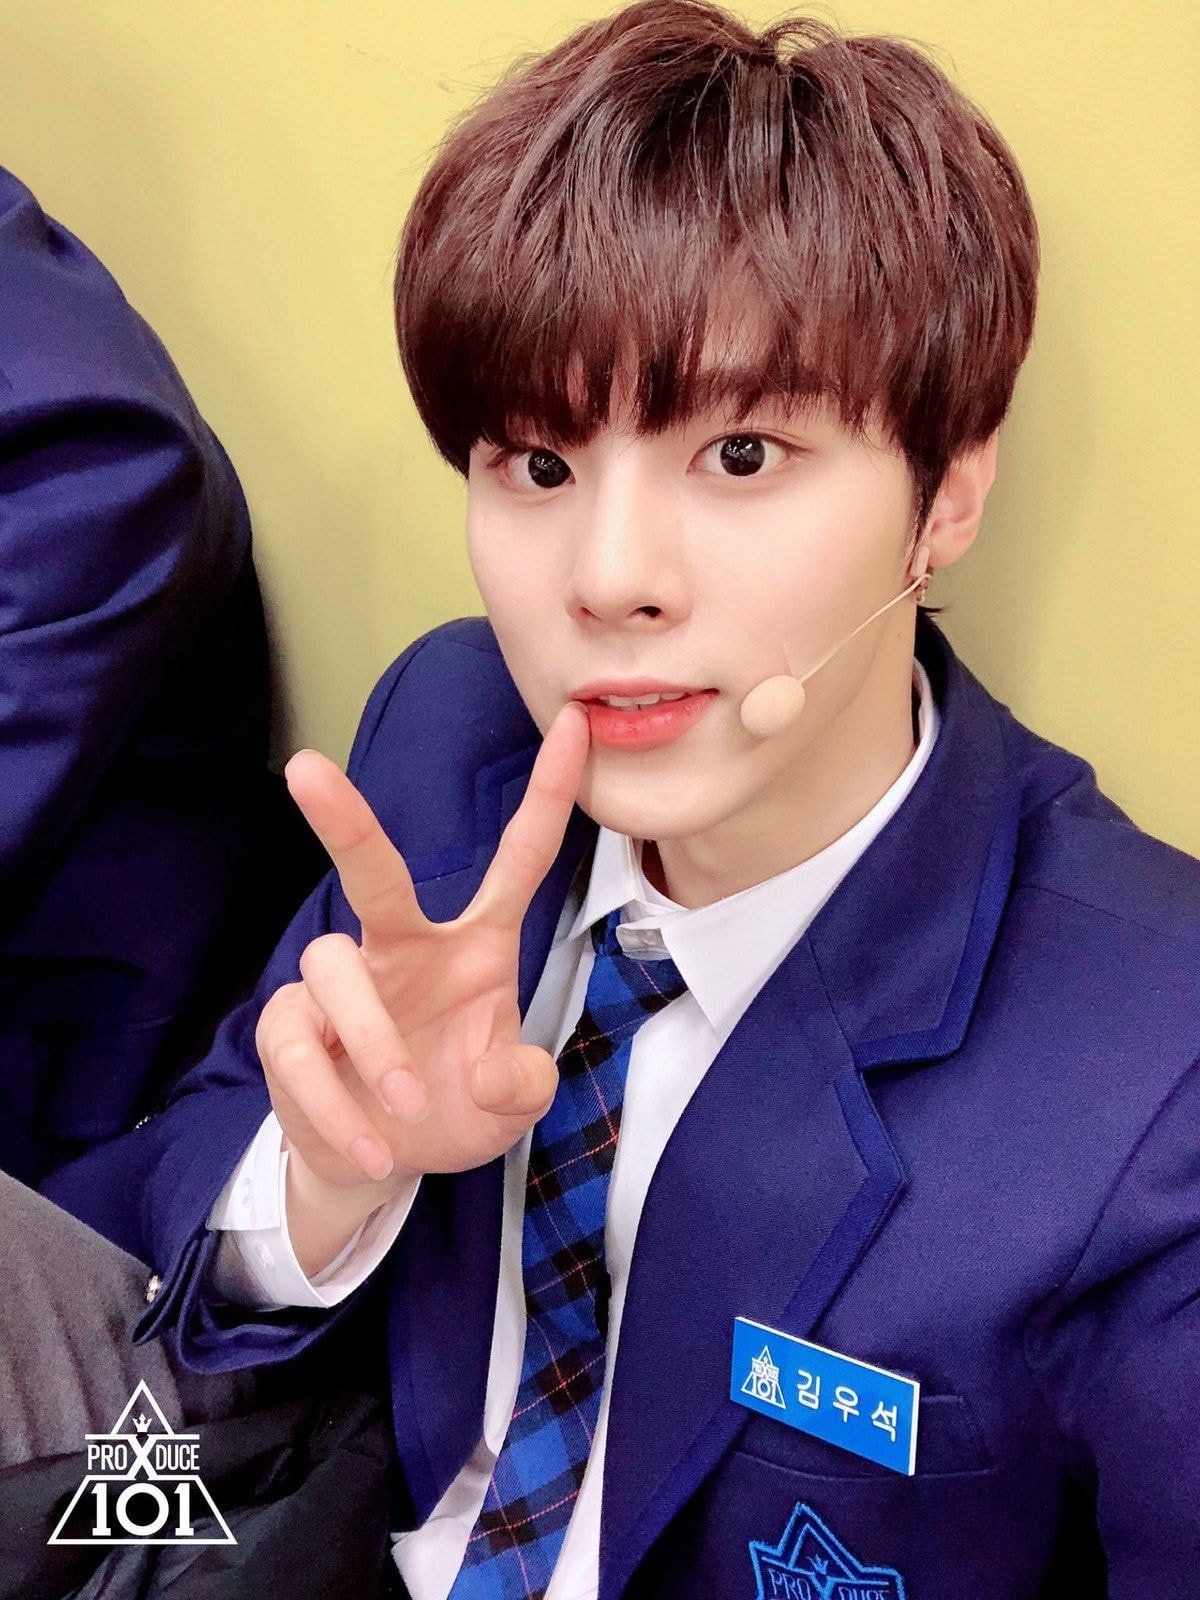 Produce X 101 Trainee Kim Wooseok's Image Completely Changes When